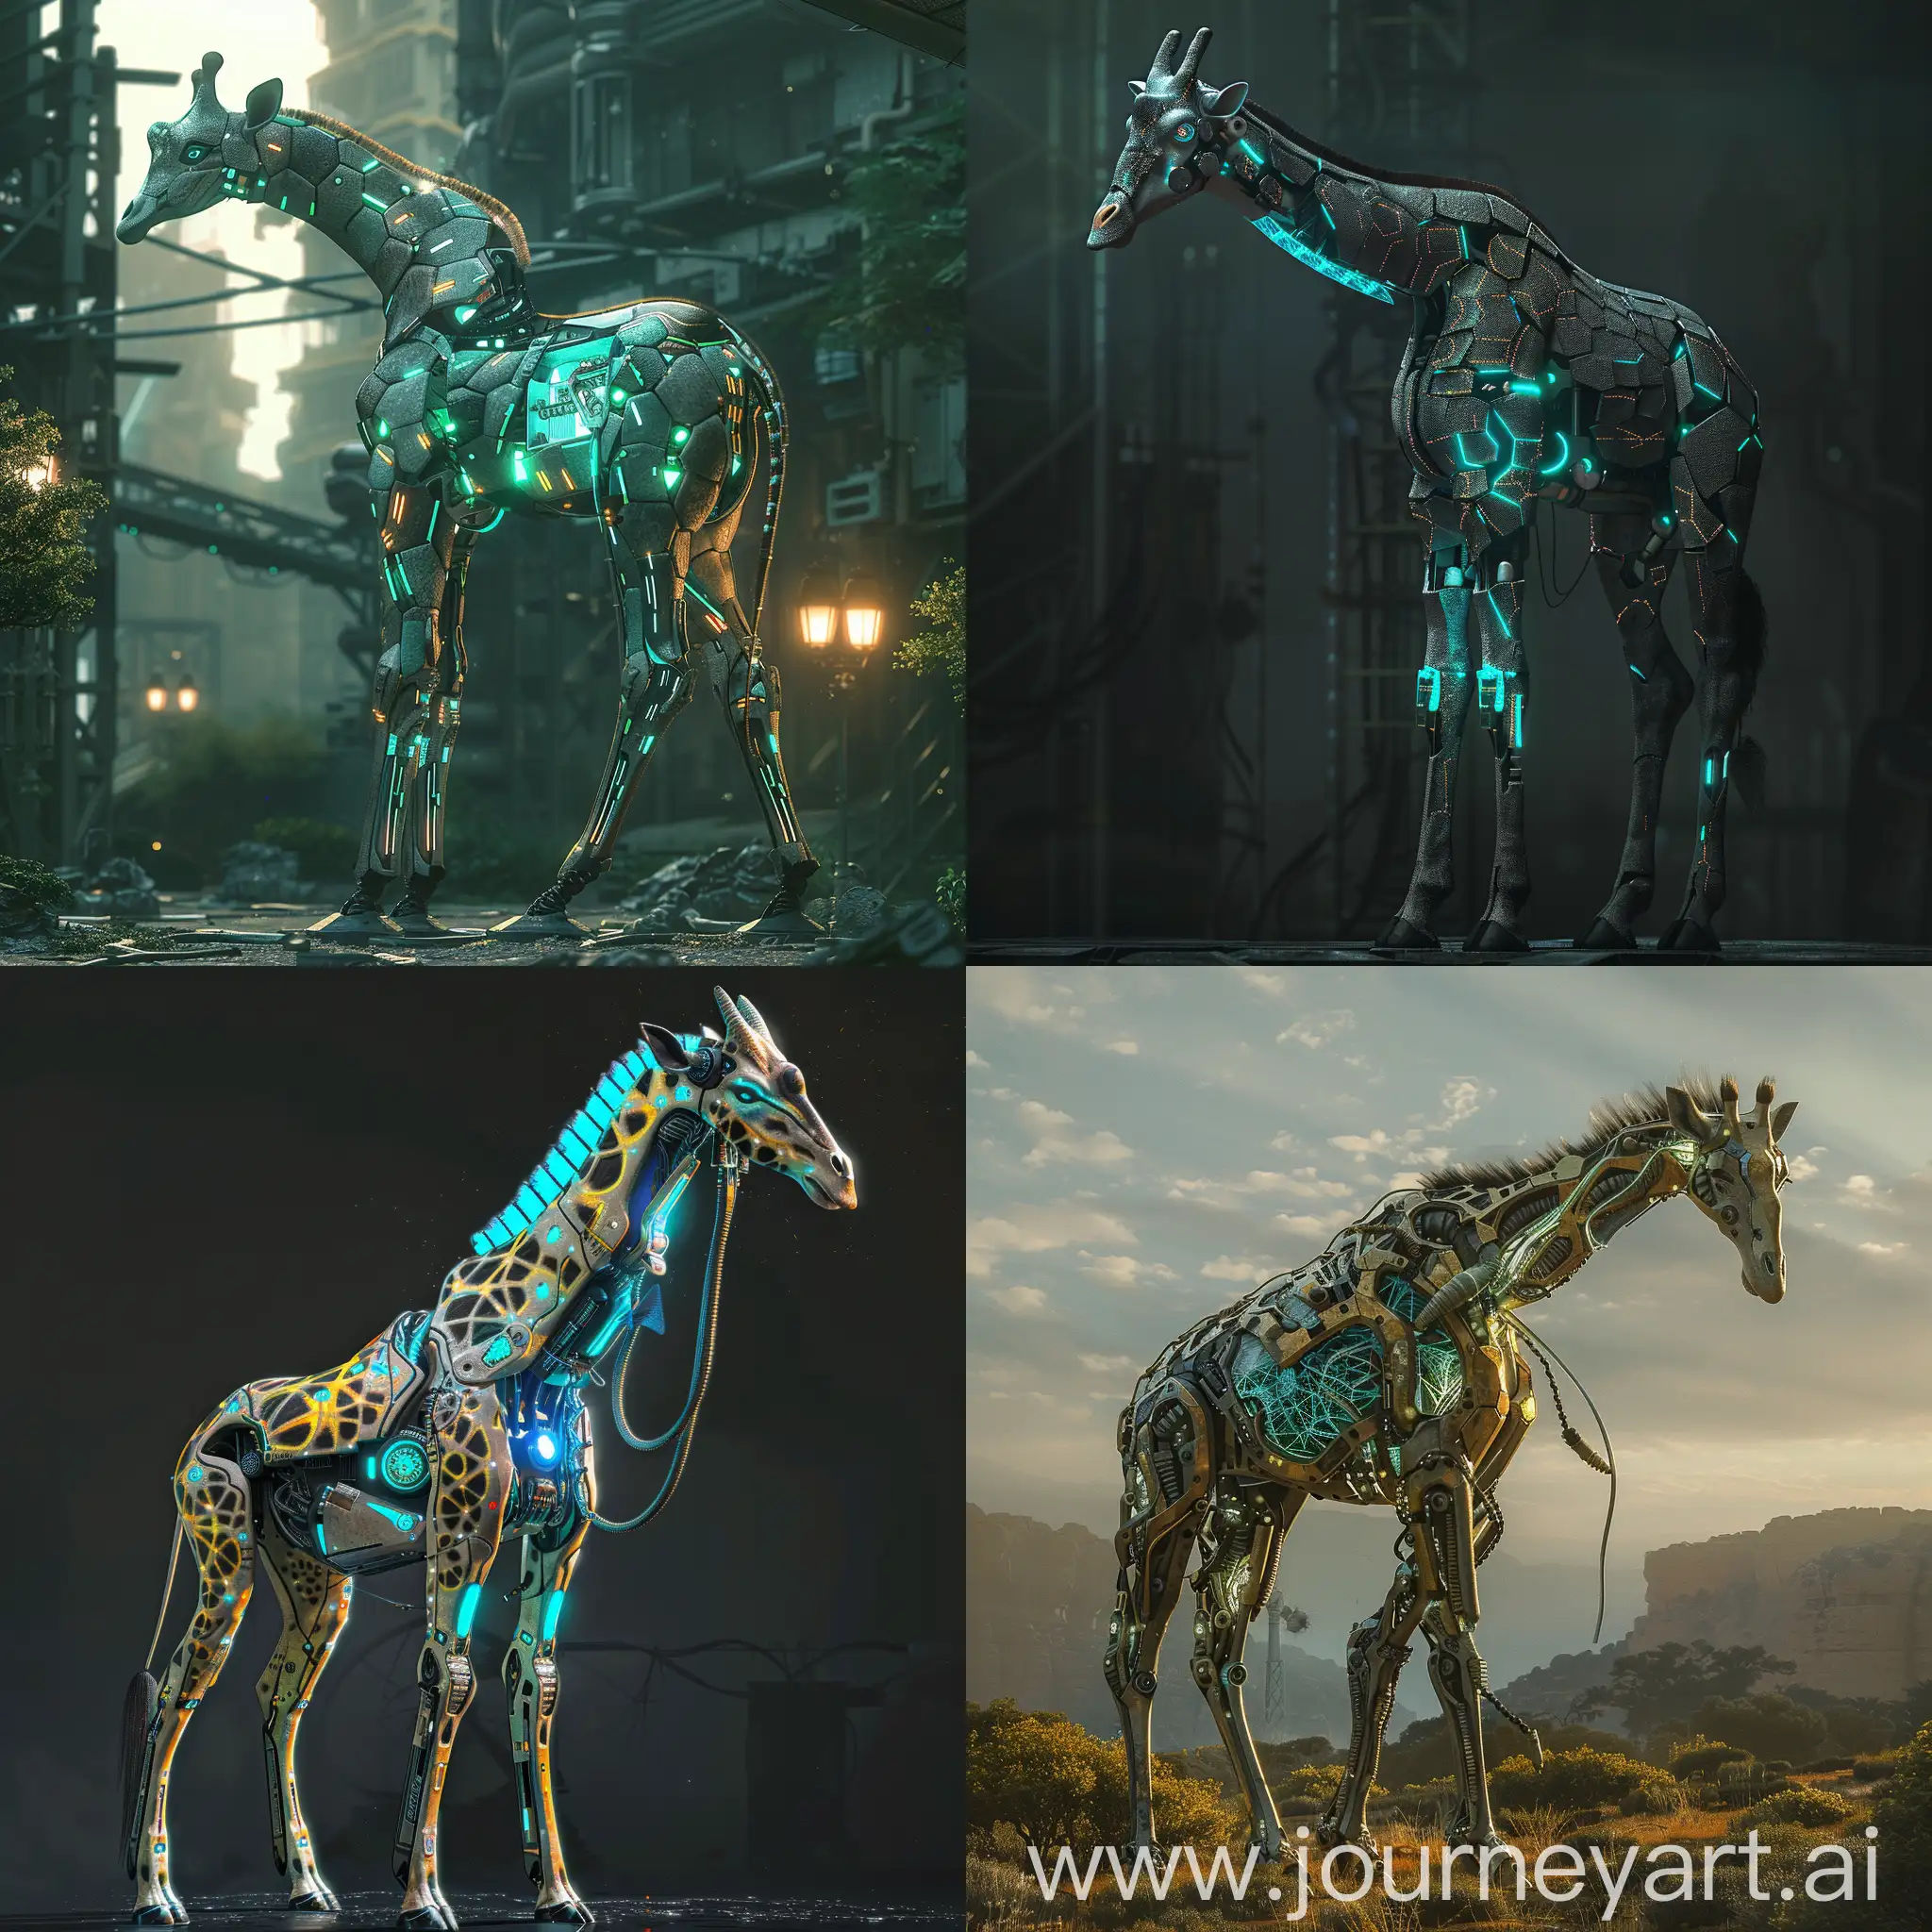 Futuristic giraffe, Helium-Filled Osseous Network (Sunshine), Bio-luminescent Mane (Avatar), Nanite-Enhanced Digestion (Attack on Titan), Neural Weather Network (Cloud Atlas), Electromagnetic Neck Muscles (Pacific Rim), Adaptive Camouflage Skin (Predestination), Internal Atmospheric Processor (Arrival), Symbiotic Microbe Colony (Annihilation), Kinetic Energy Harvesting System (Ergo Proxy), Augmented Reality Retina (Black Mirror), Solar Sail Humps (Midsommar), Fractal Patterned Hide (Primer), Modular Leg Attachments (Upgrade), Prehensile Multi-Tool Tail (Altered Carbon), Holographic Projection Horns (Mandy), Wind Turbine Ears (Snowpiercer), Filter-Feathered Snout (Annihilation Shimmer Fringe), Bioluminescent Underbelly (Pi), Cybernetic Eye Patch (Ex Machina), Symbiotic Drone Nest (Arrival Heptapod Pods), unreal engine 5 rendering, 4K-UHD, 8K-UHD, super-hi vision, soft shadows, soft reflections, soft lighting, soft light, soft details, hard shadows, hard shadows, hard reflections, hard lighting, hard lighting, hard details --stylize 1000